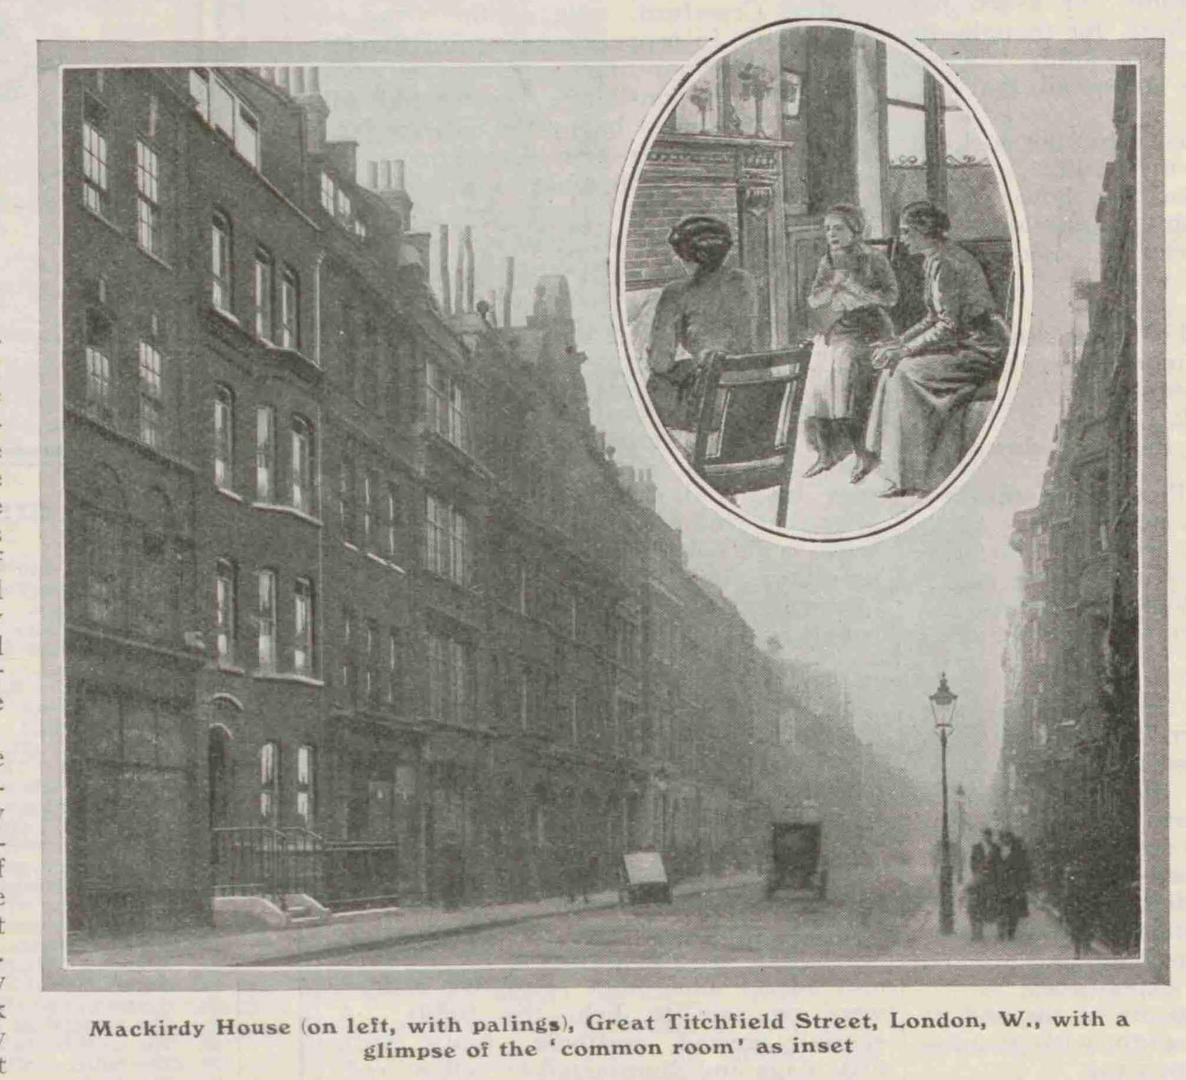 The Salvation Army's Mackirdy House Hostel for Women on Great Titchfield Street